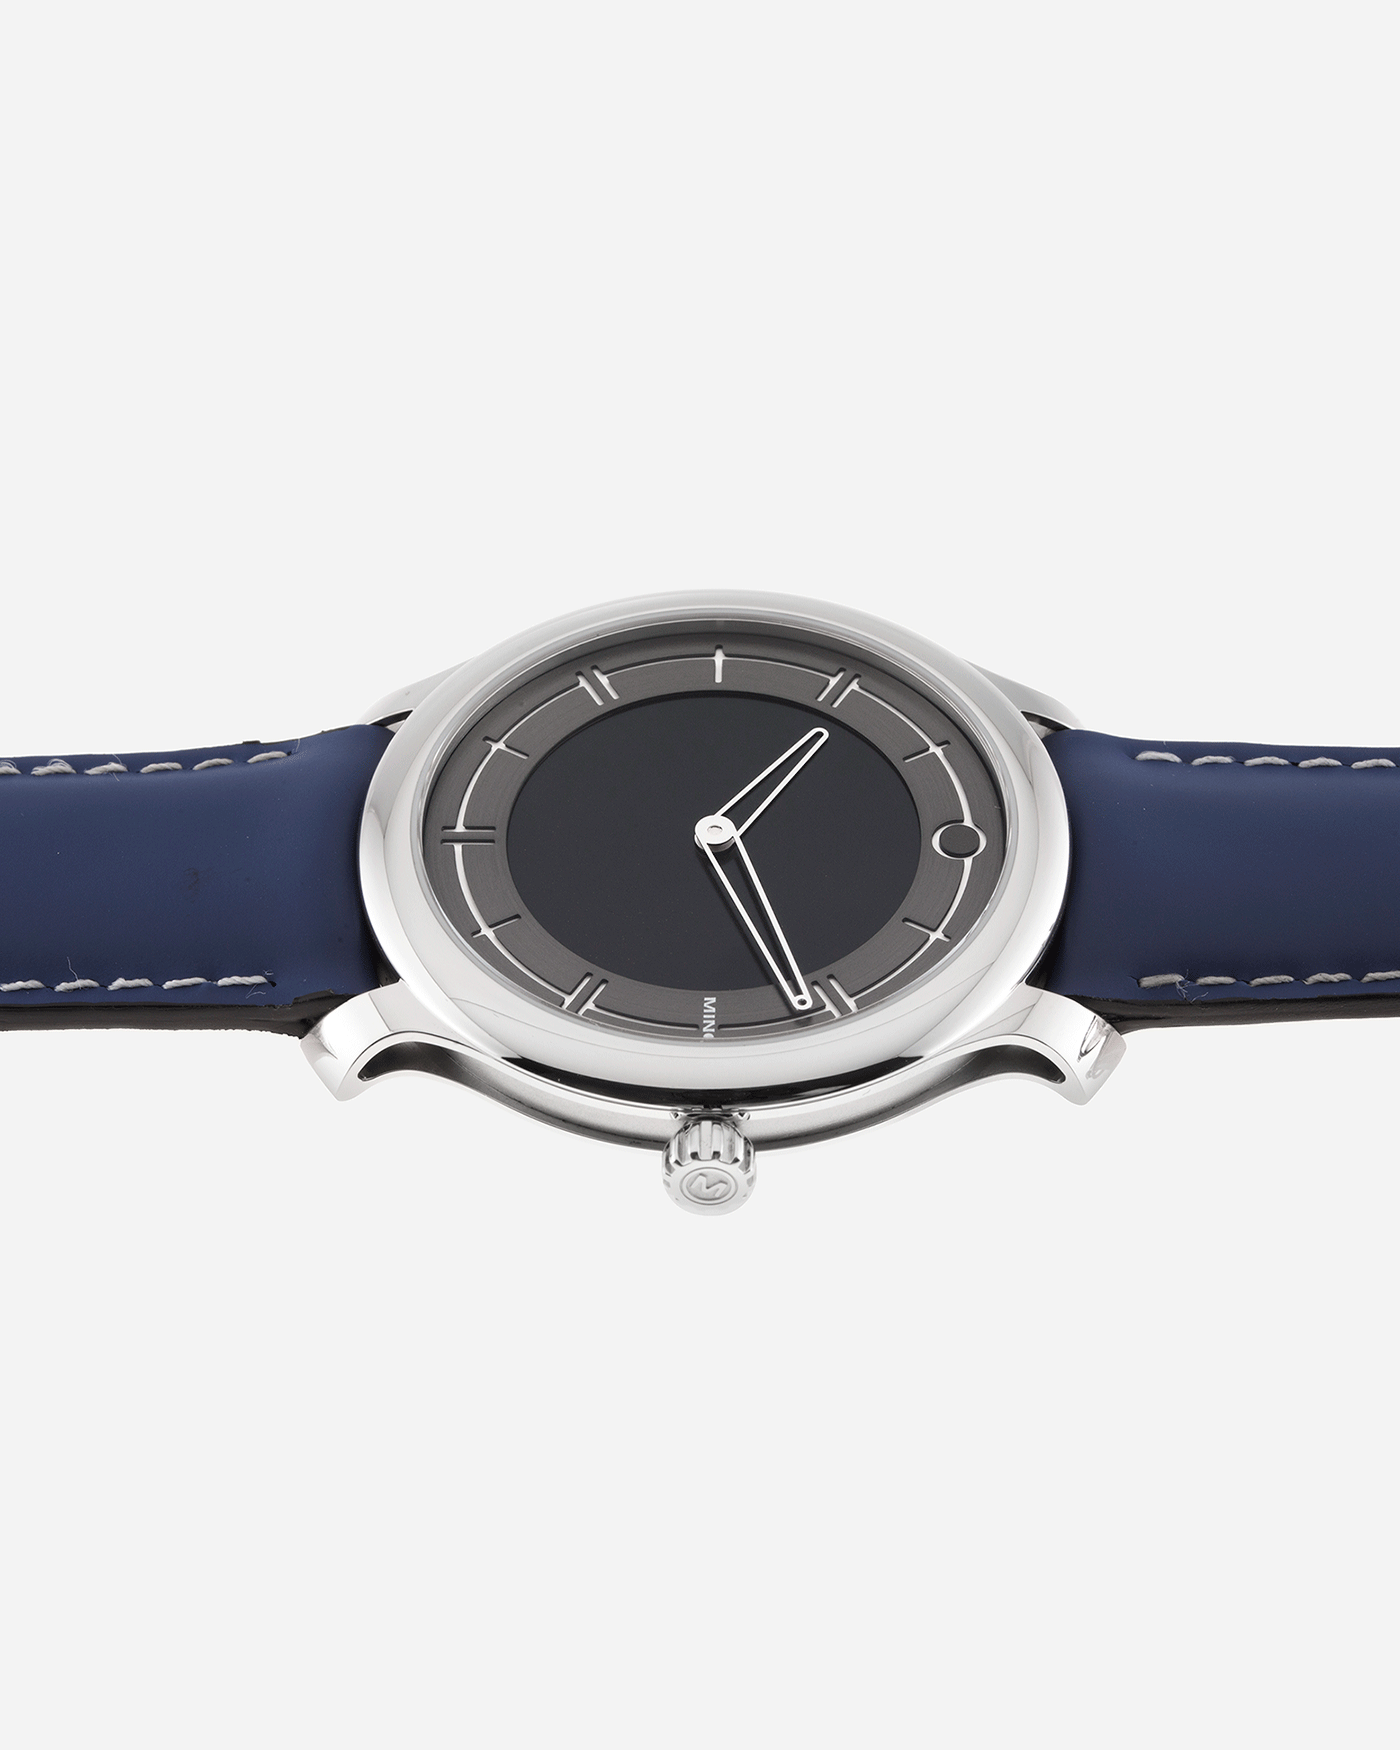 Brand: Ming Year: 2020 Model: 27.01 Material: Stainless Steel Movement: Heavily modified ETA Peseux 7001 Case Diameter: 38mm Strap: Jean Rousseau Blue Rubber for MINGBrand: Ming Year: 2020 Model: 27.01 Material: Stainless Steel Movement: Heavily modified ETA Peseux 7001 Case Diameter: 38mm Strap: Jean Rousseau Blue Rubber for MING